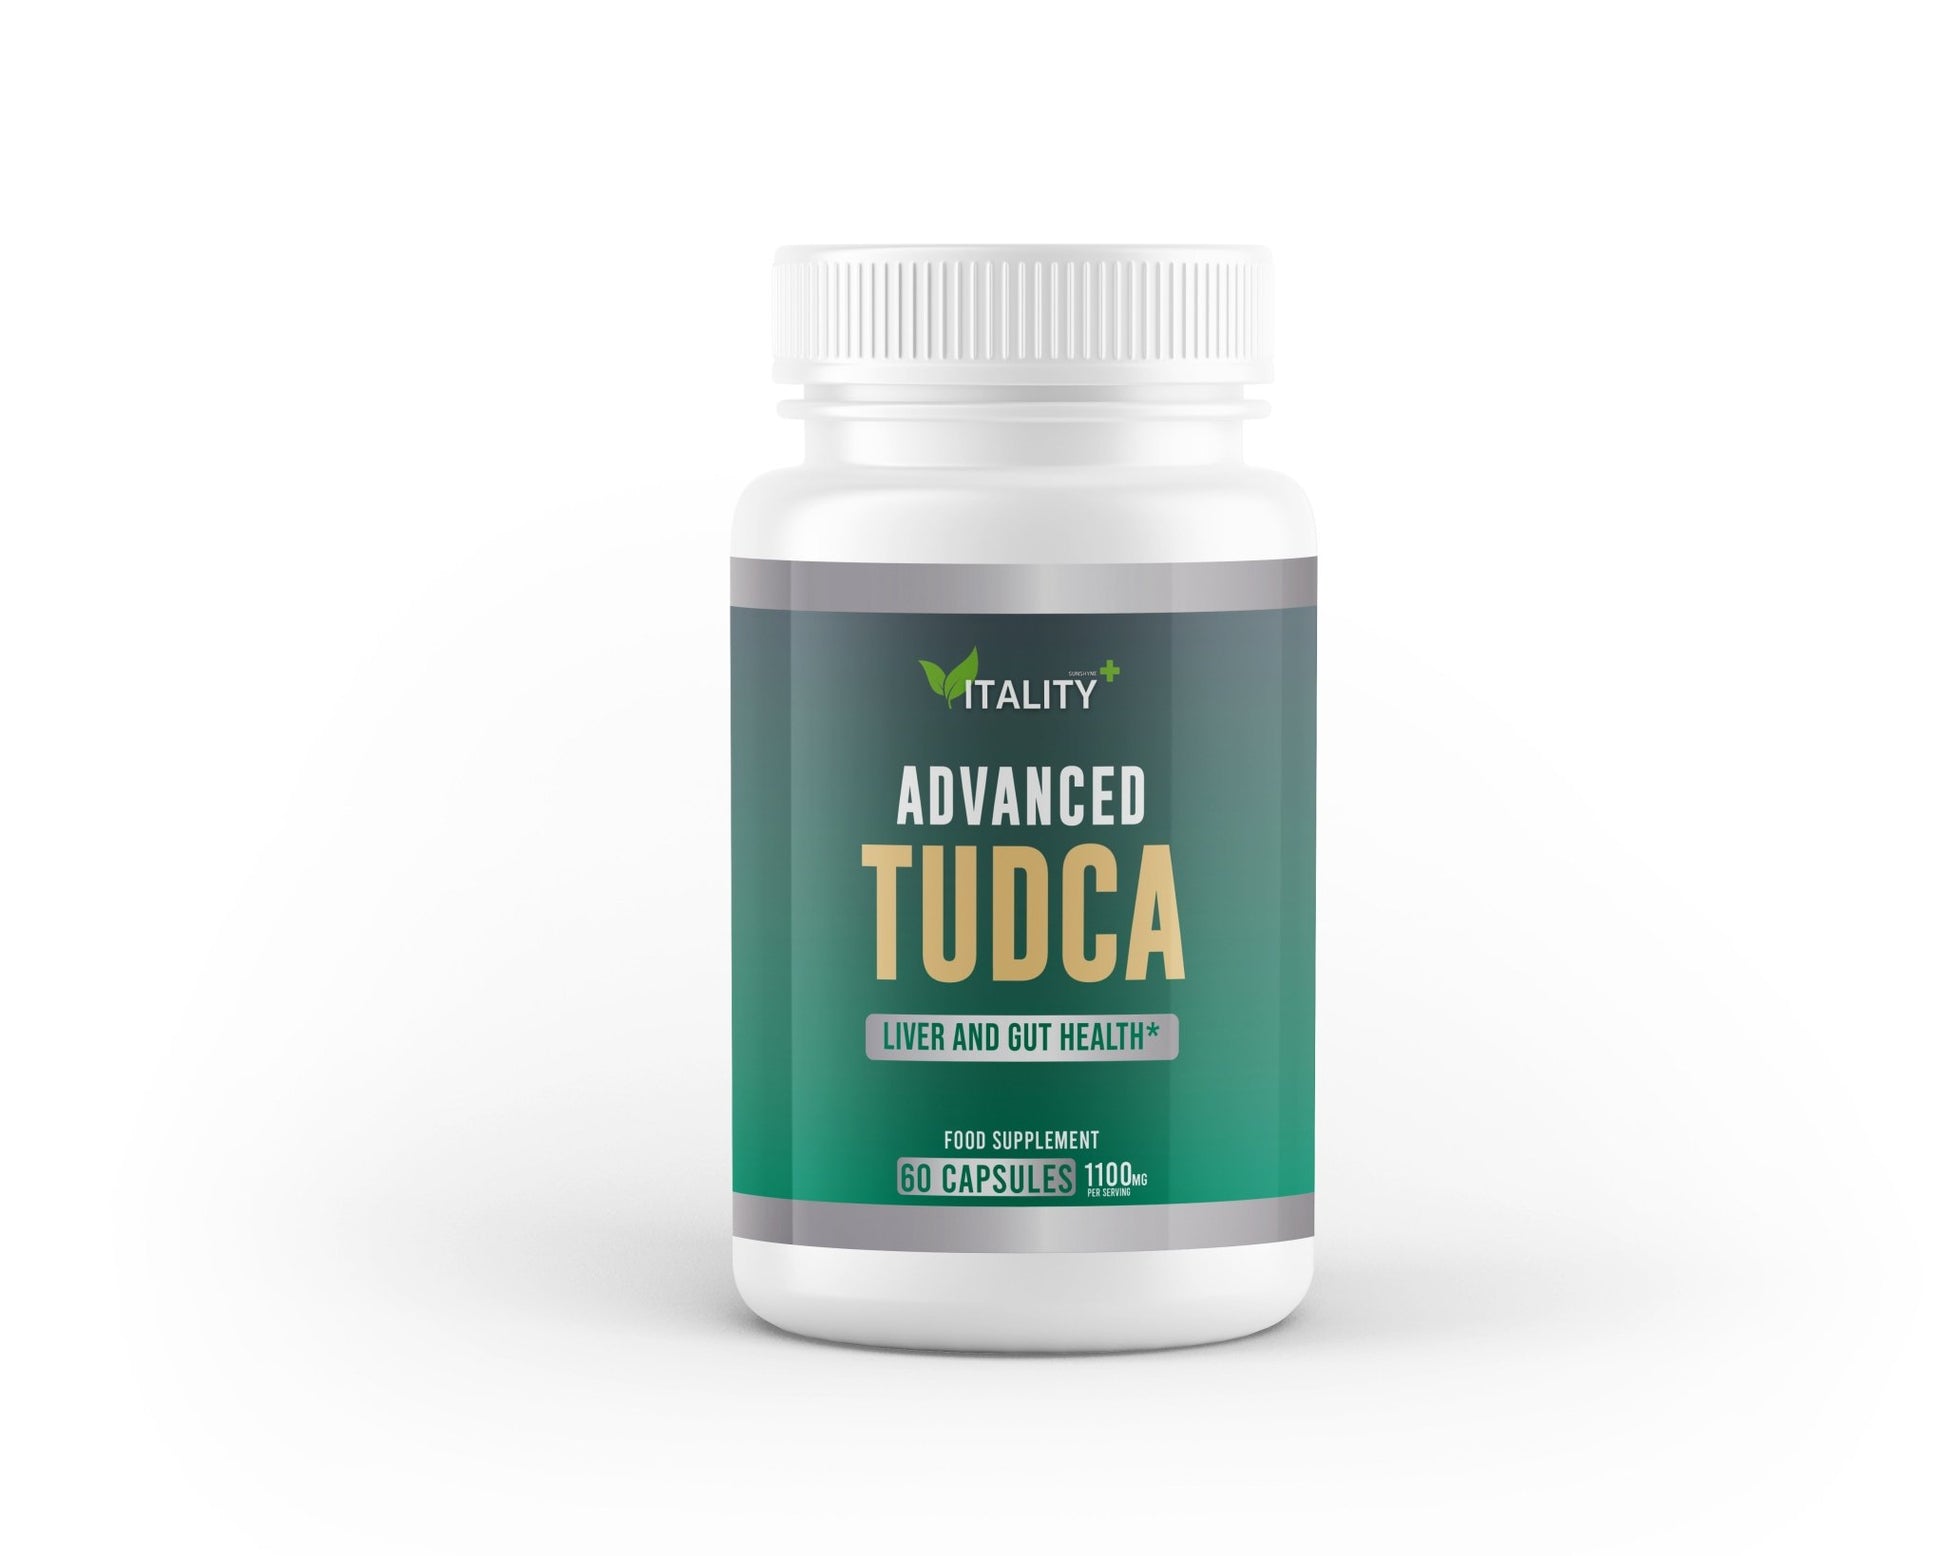 Premium TUDCA Liver Support: 1100mg, 60 Capsules - Ultimate Detox & Liver Health Formula, 30-Day Supply - Vitality Supplements